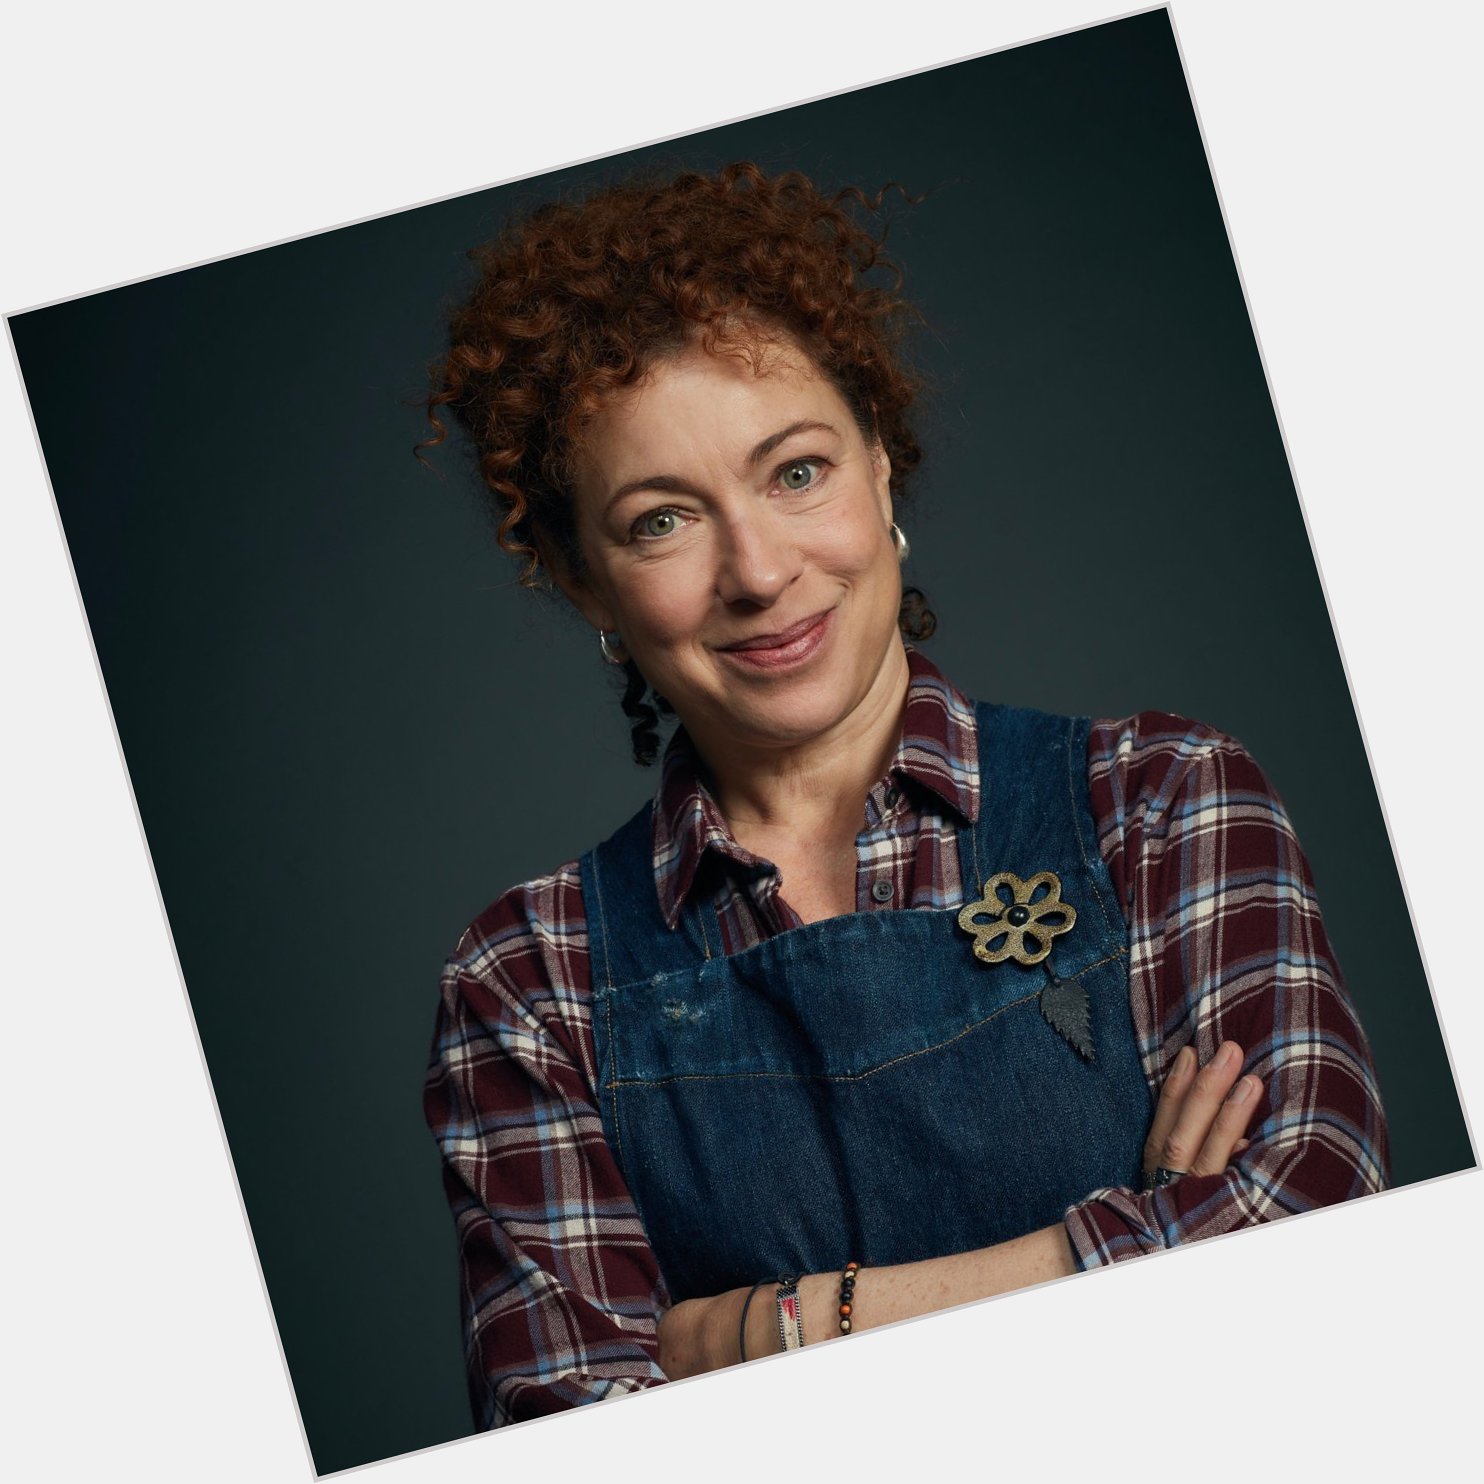 Huge happy birthday to our amazing Aunt Sarah - the one and only Alex Kingston! We hope you have a magical day 